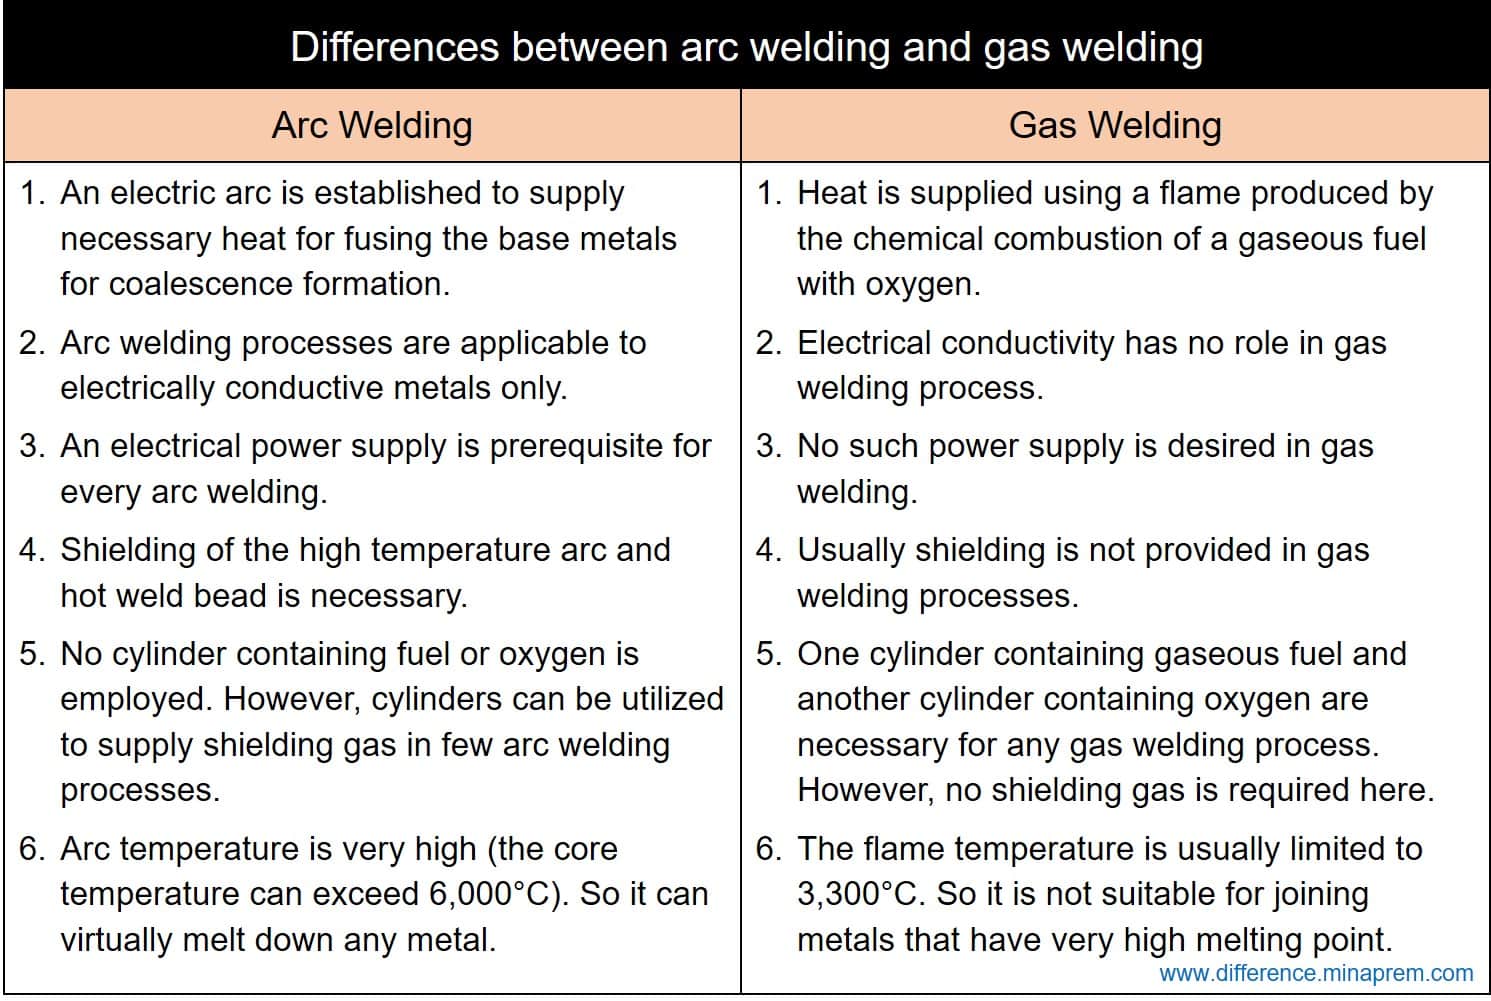 Difference between arc welding and gas welding